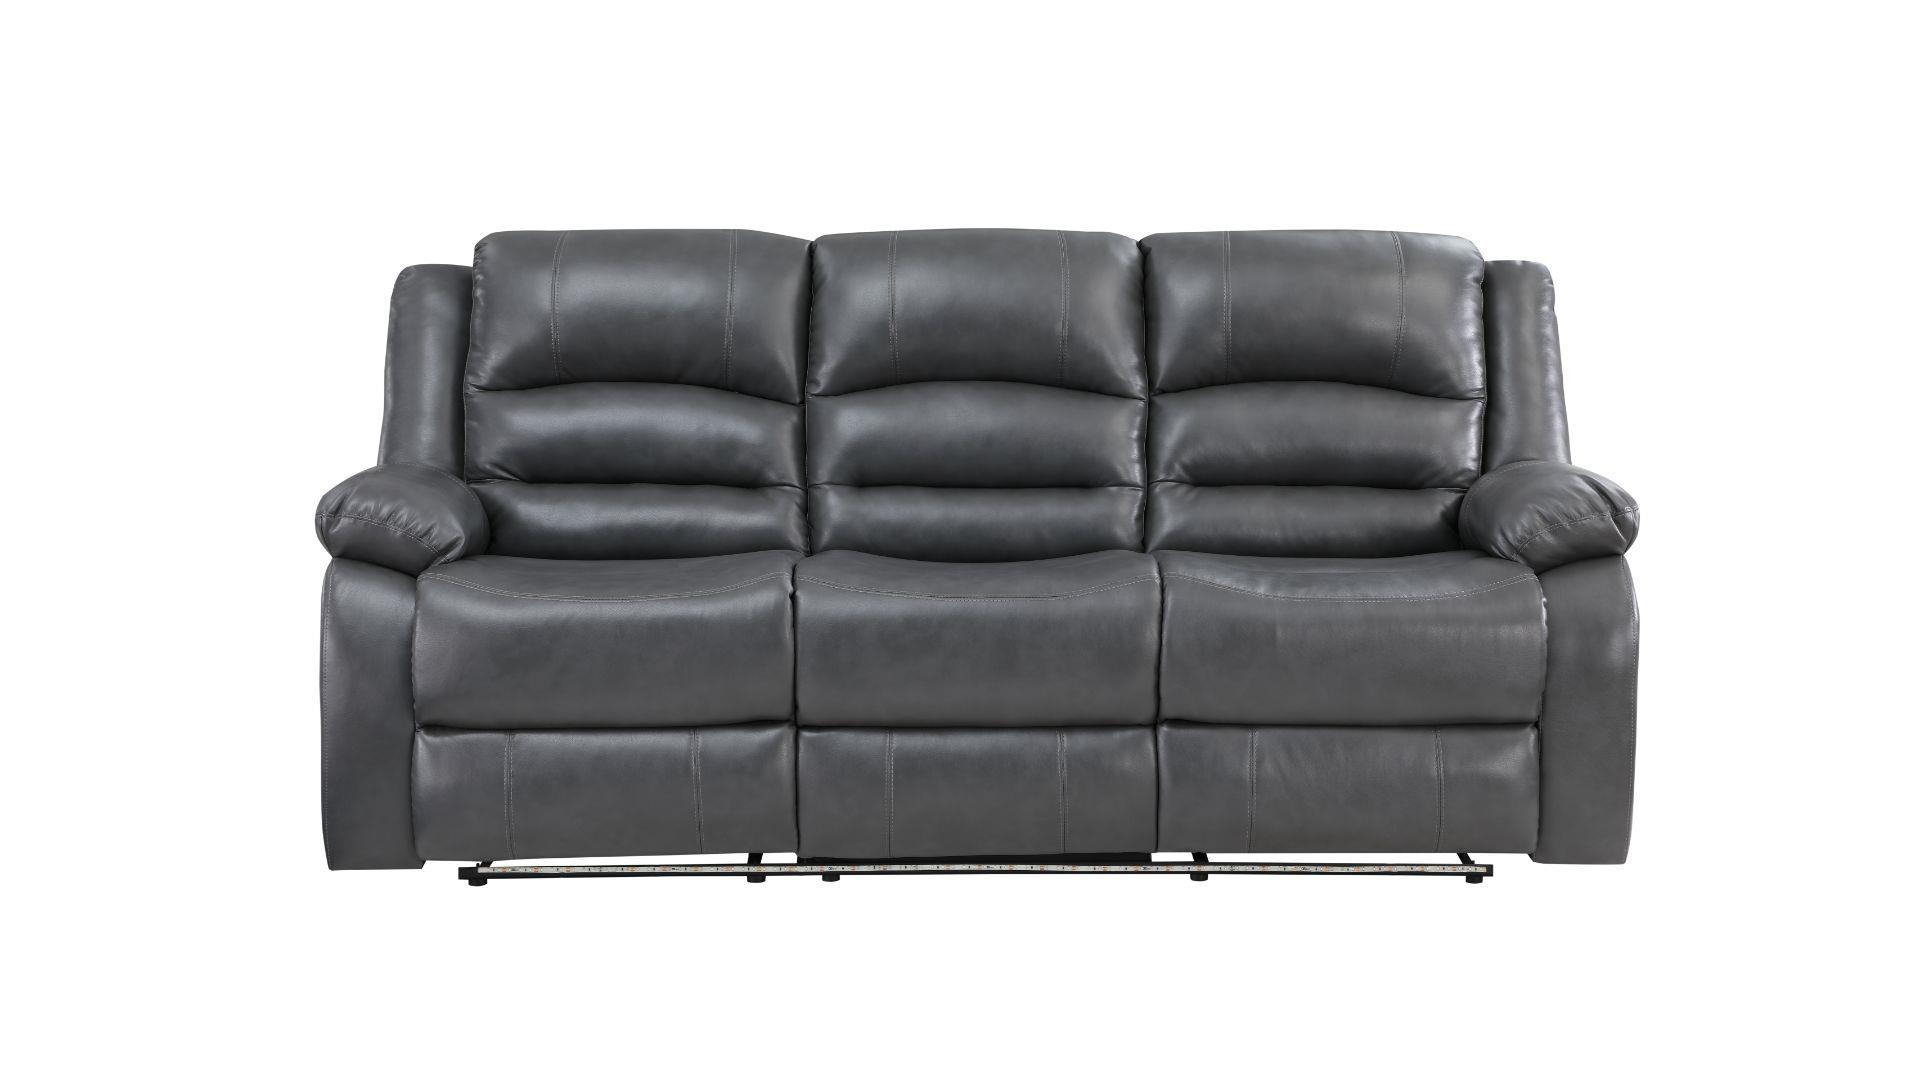 Contemporary, Modern Recliner Sofa MARTIN GR MARTIN-GR-S in Gray Faux Leather